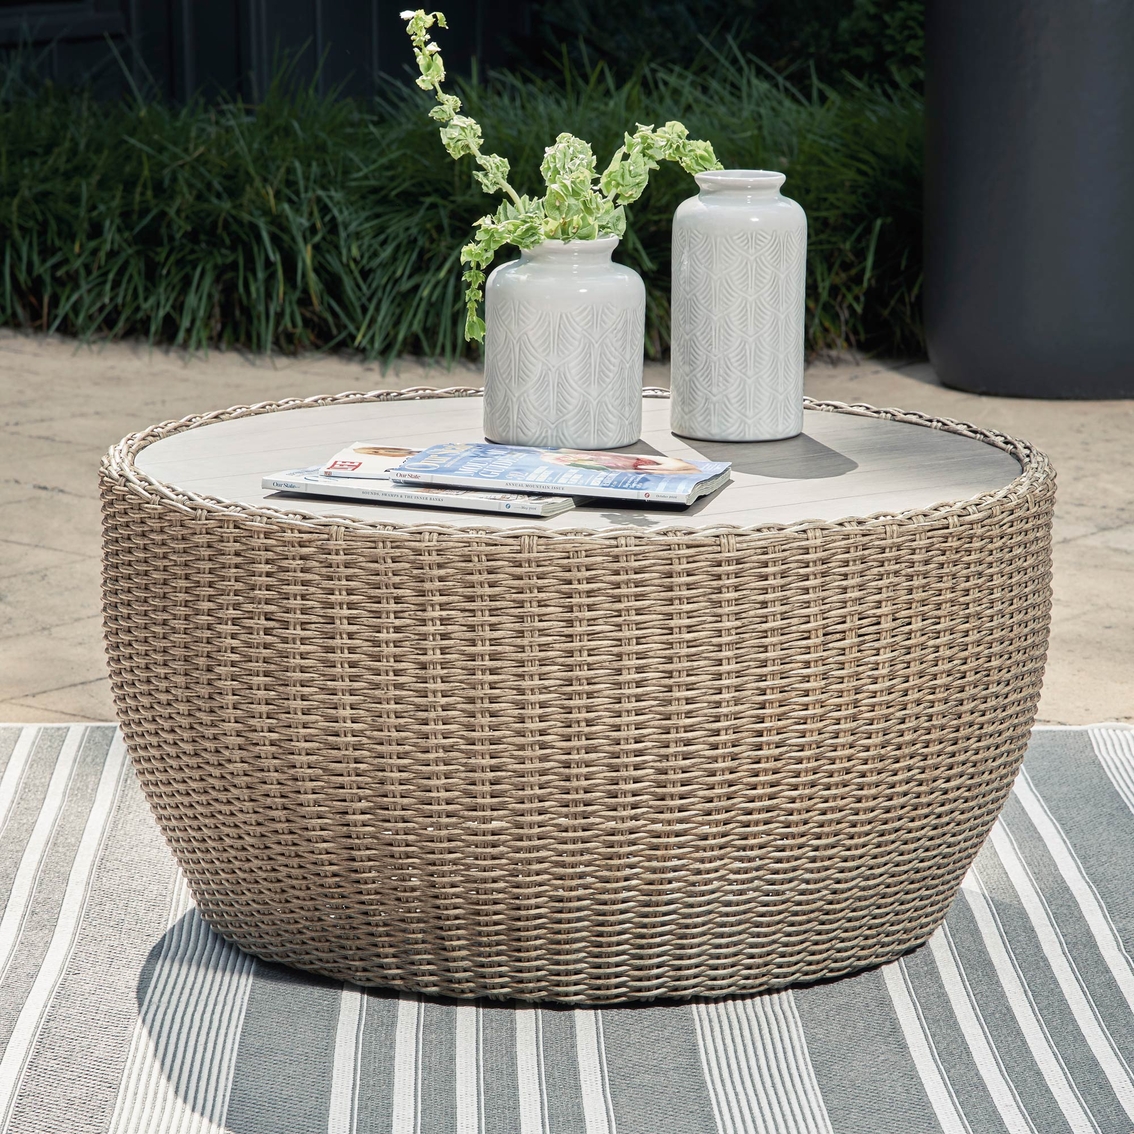 Signature Design by Ashley Danson Outdoor Coffee Table - Image 3 of 5